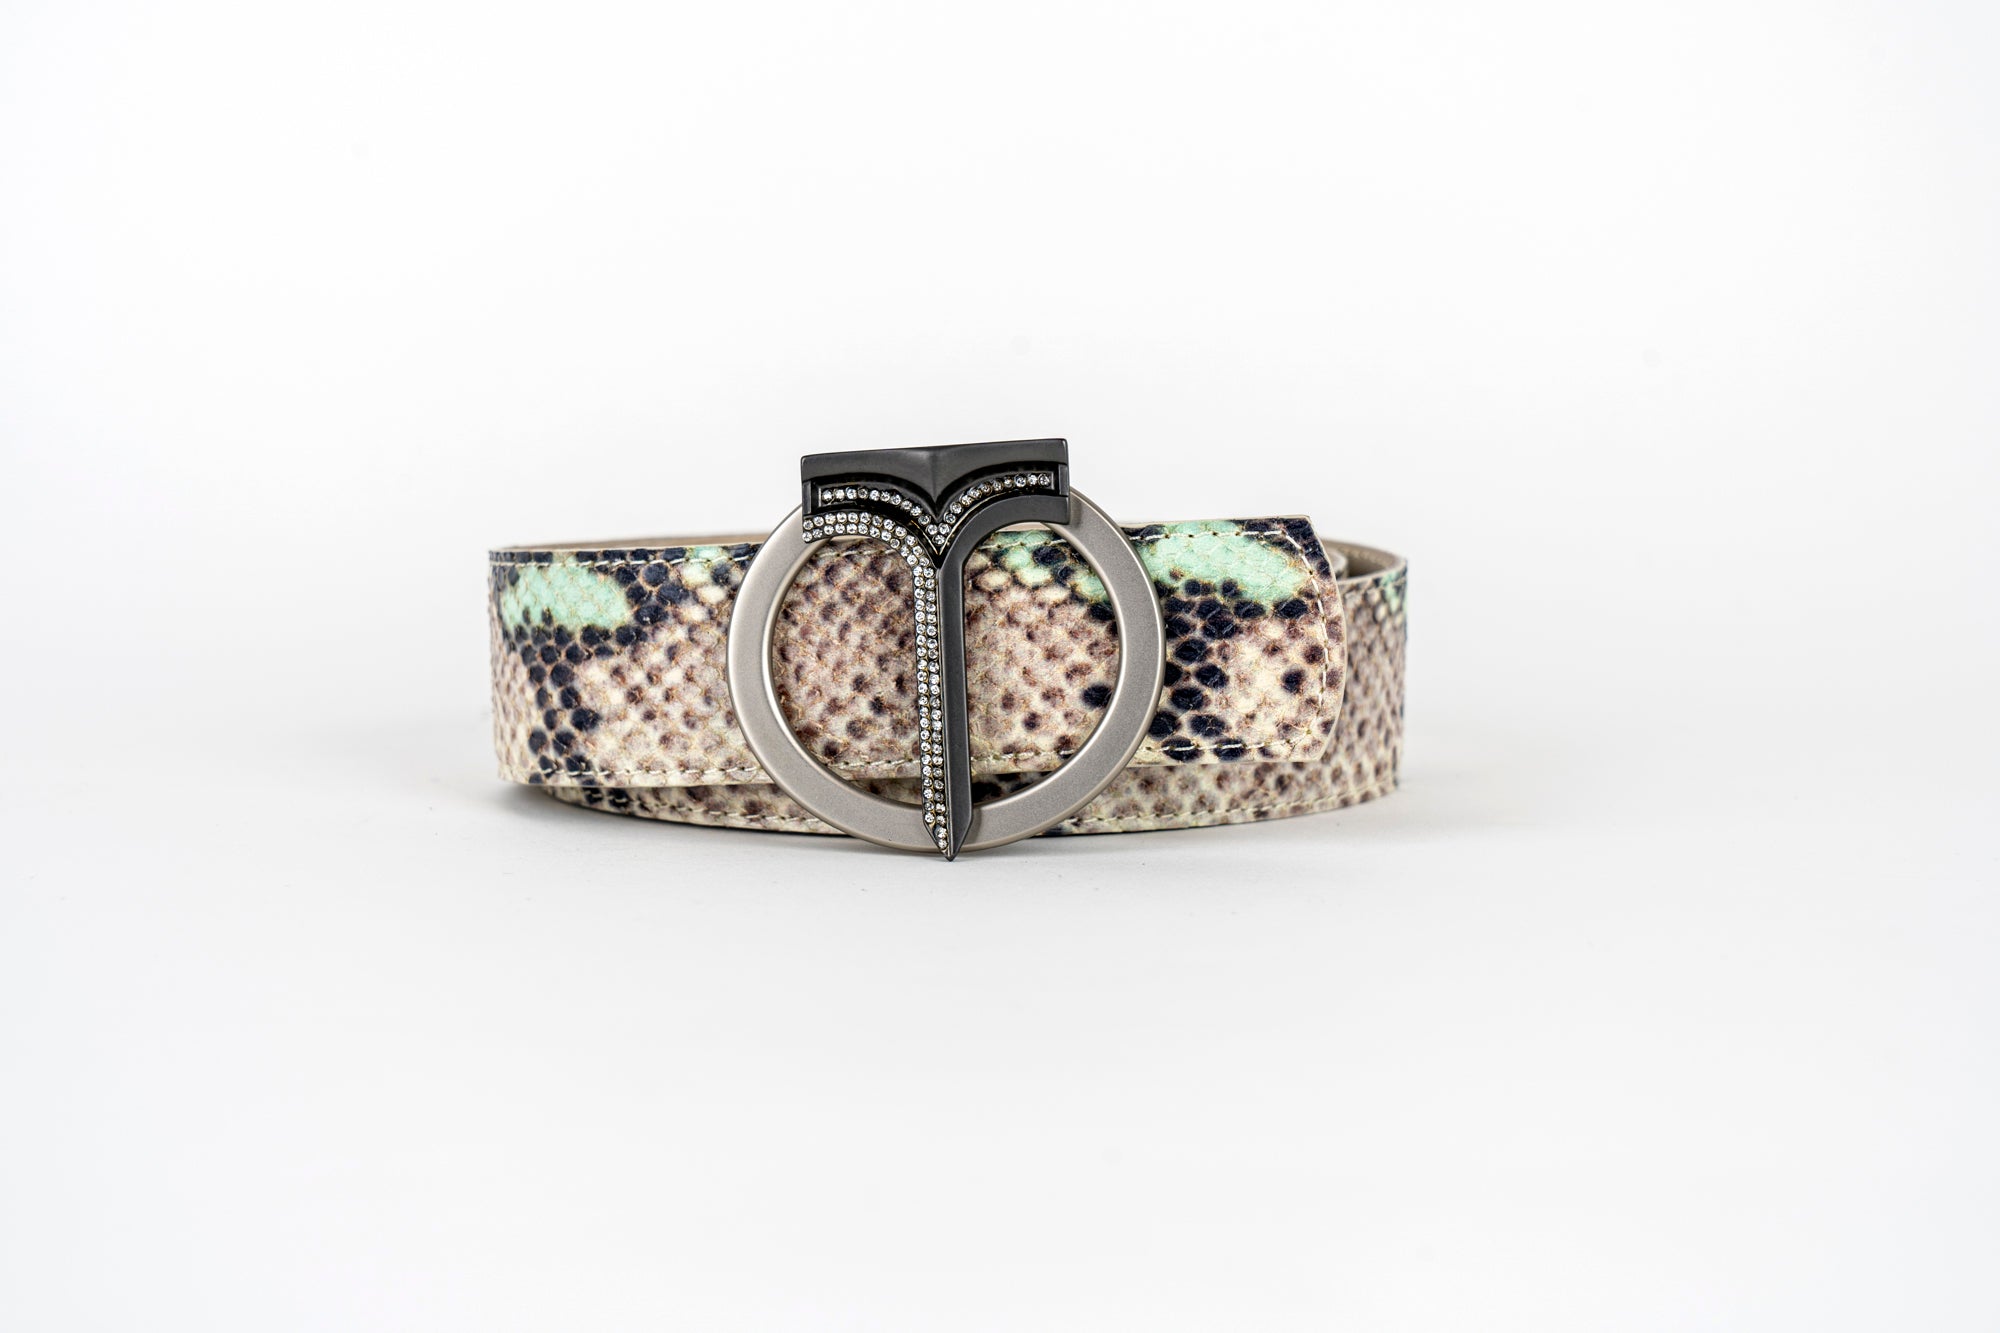 CINTURA IN PELLE DI VITELLO CON STAMPA PITONE Grey and green/ Grey and Green Calf Leather Belt with Python Print